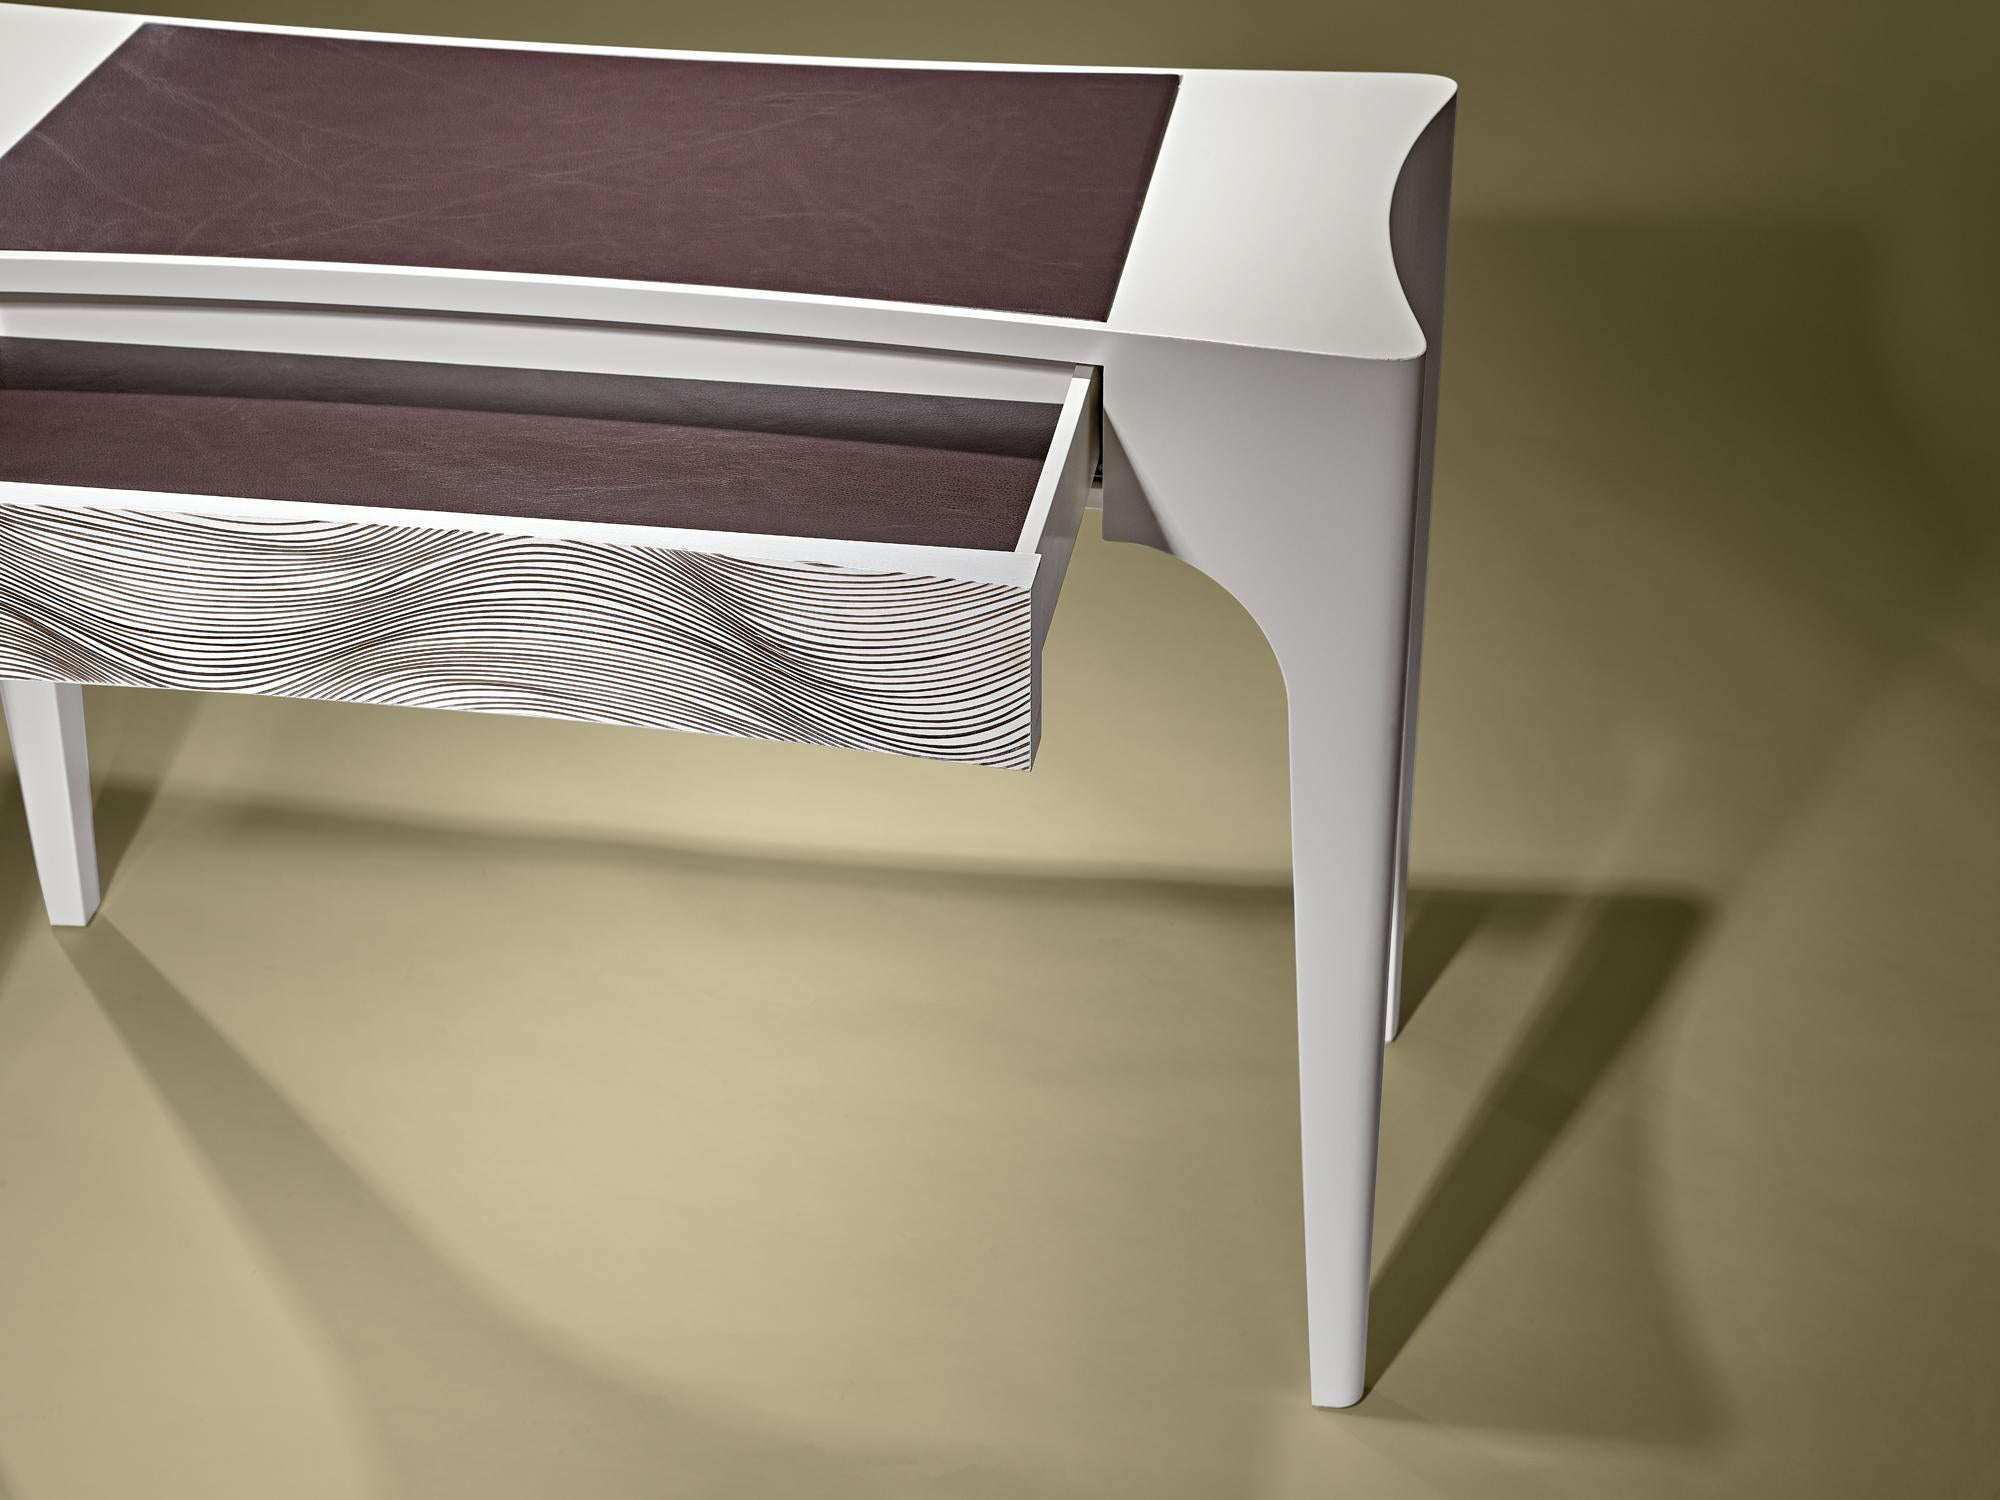 Desk in matt ivory lacquer, leather inserted top and drawer with artistic intervention of Paulo Neves.

Bespoke / Customizable
Identical shapes with different sizes and finishings.
All RAL colors available. (Mate / Half Gloss / Gloss)